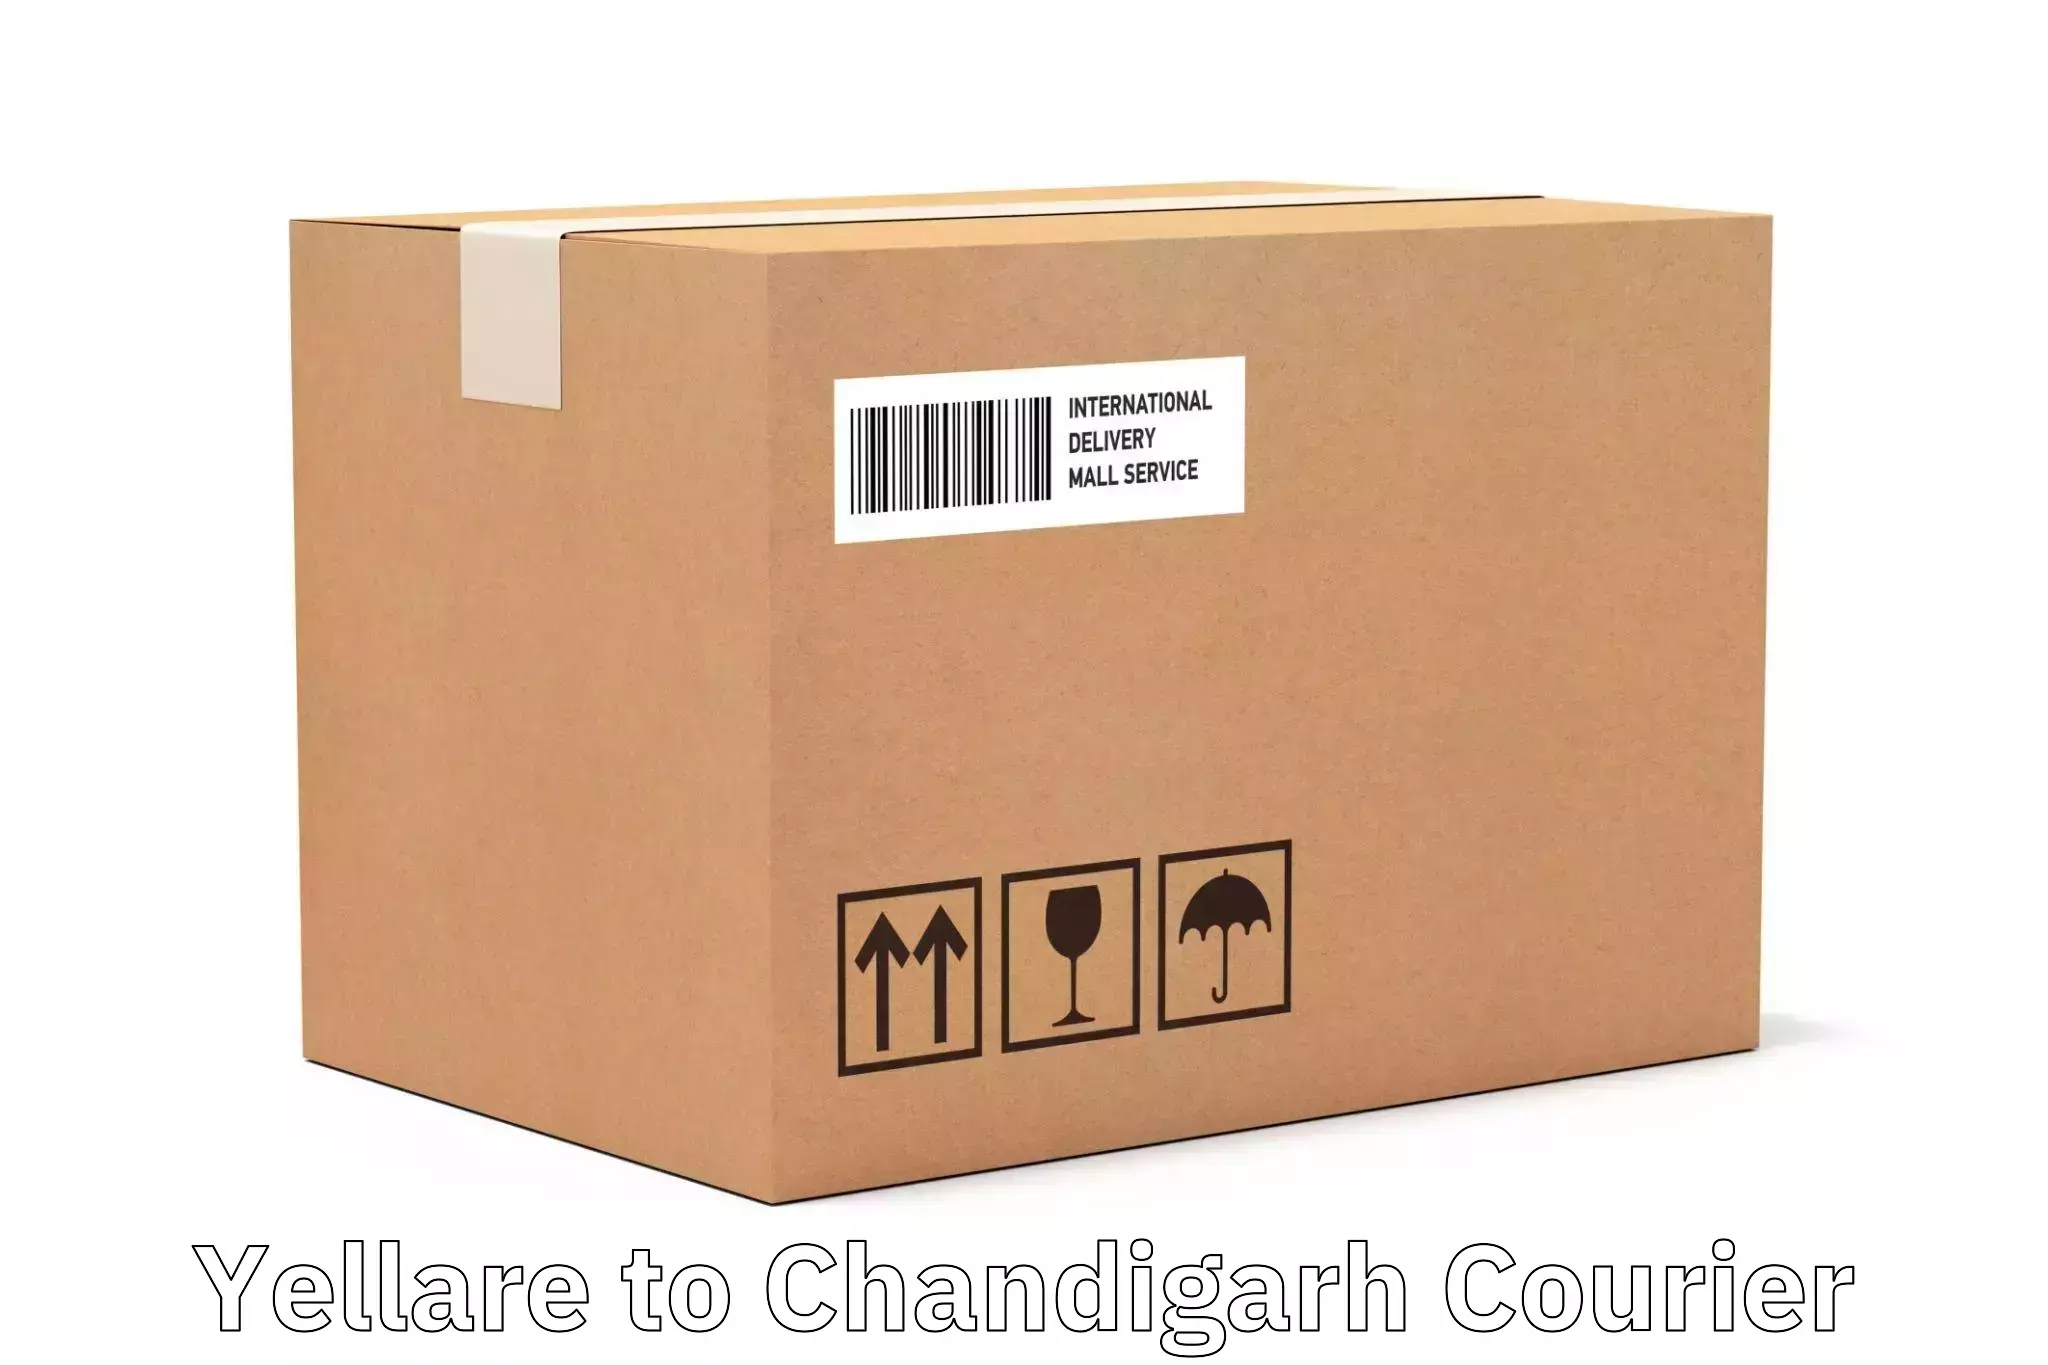 High-speed delivery Yellare to Chandigarh